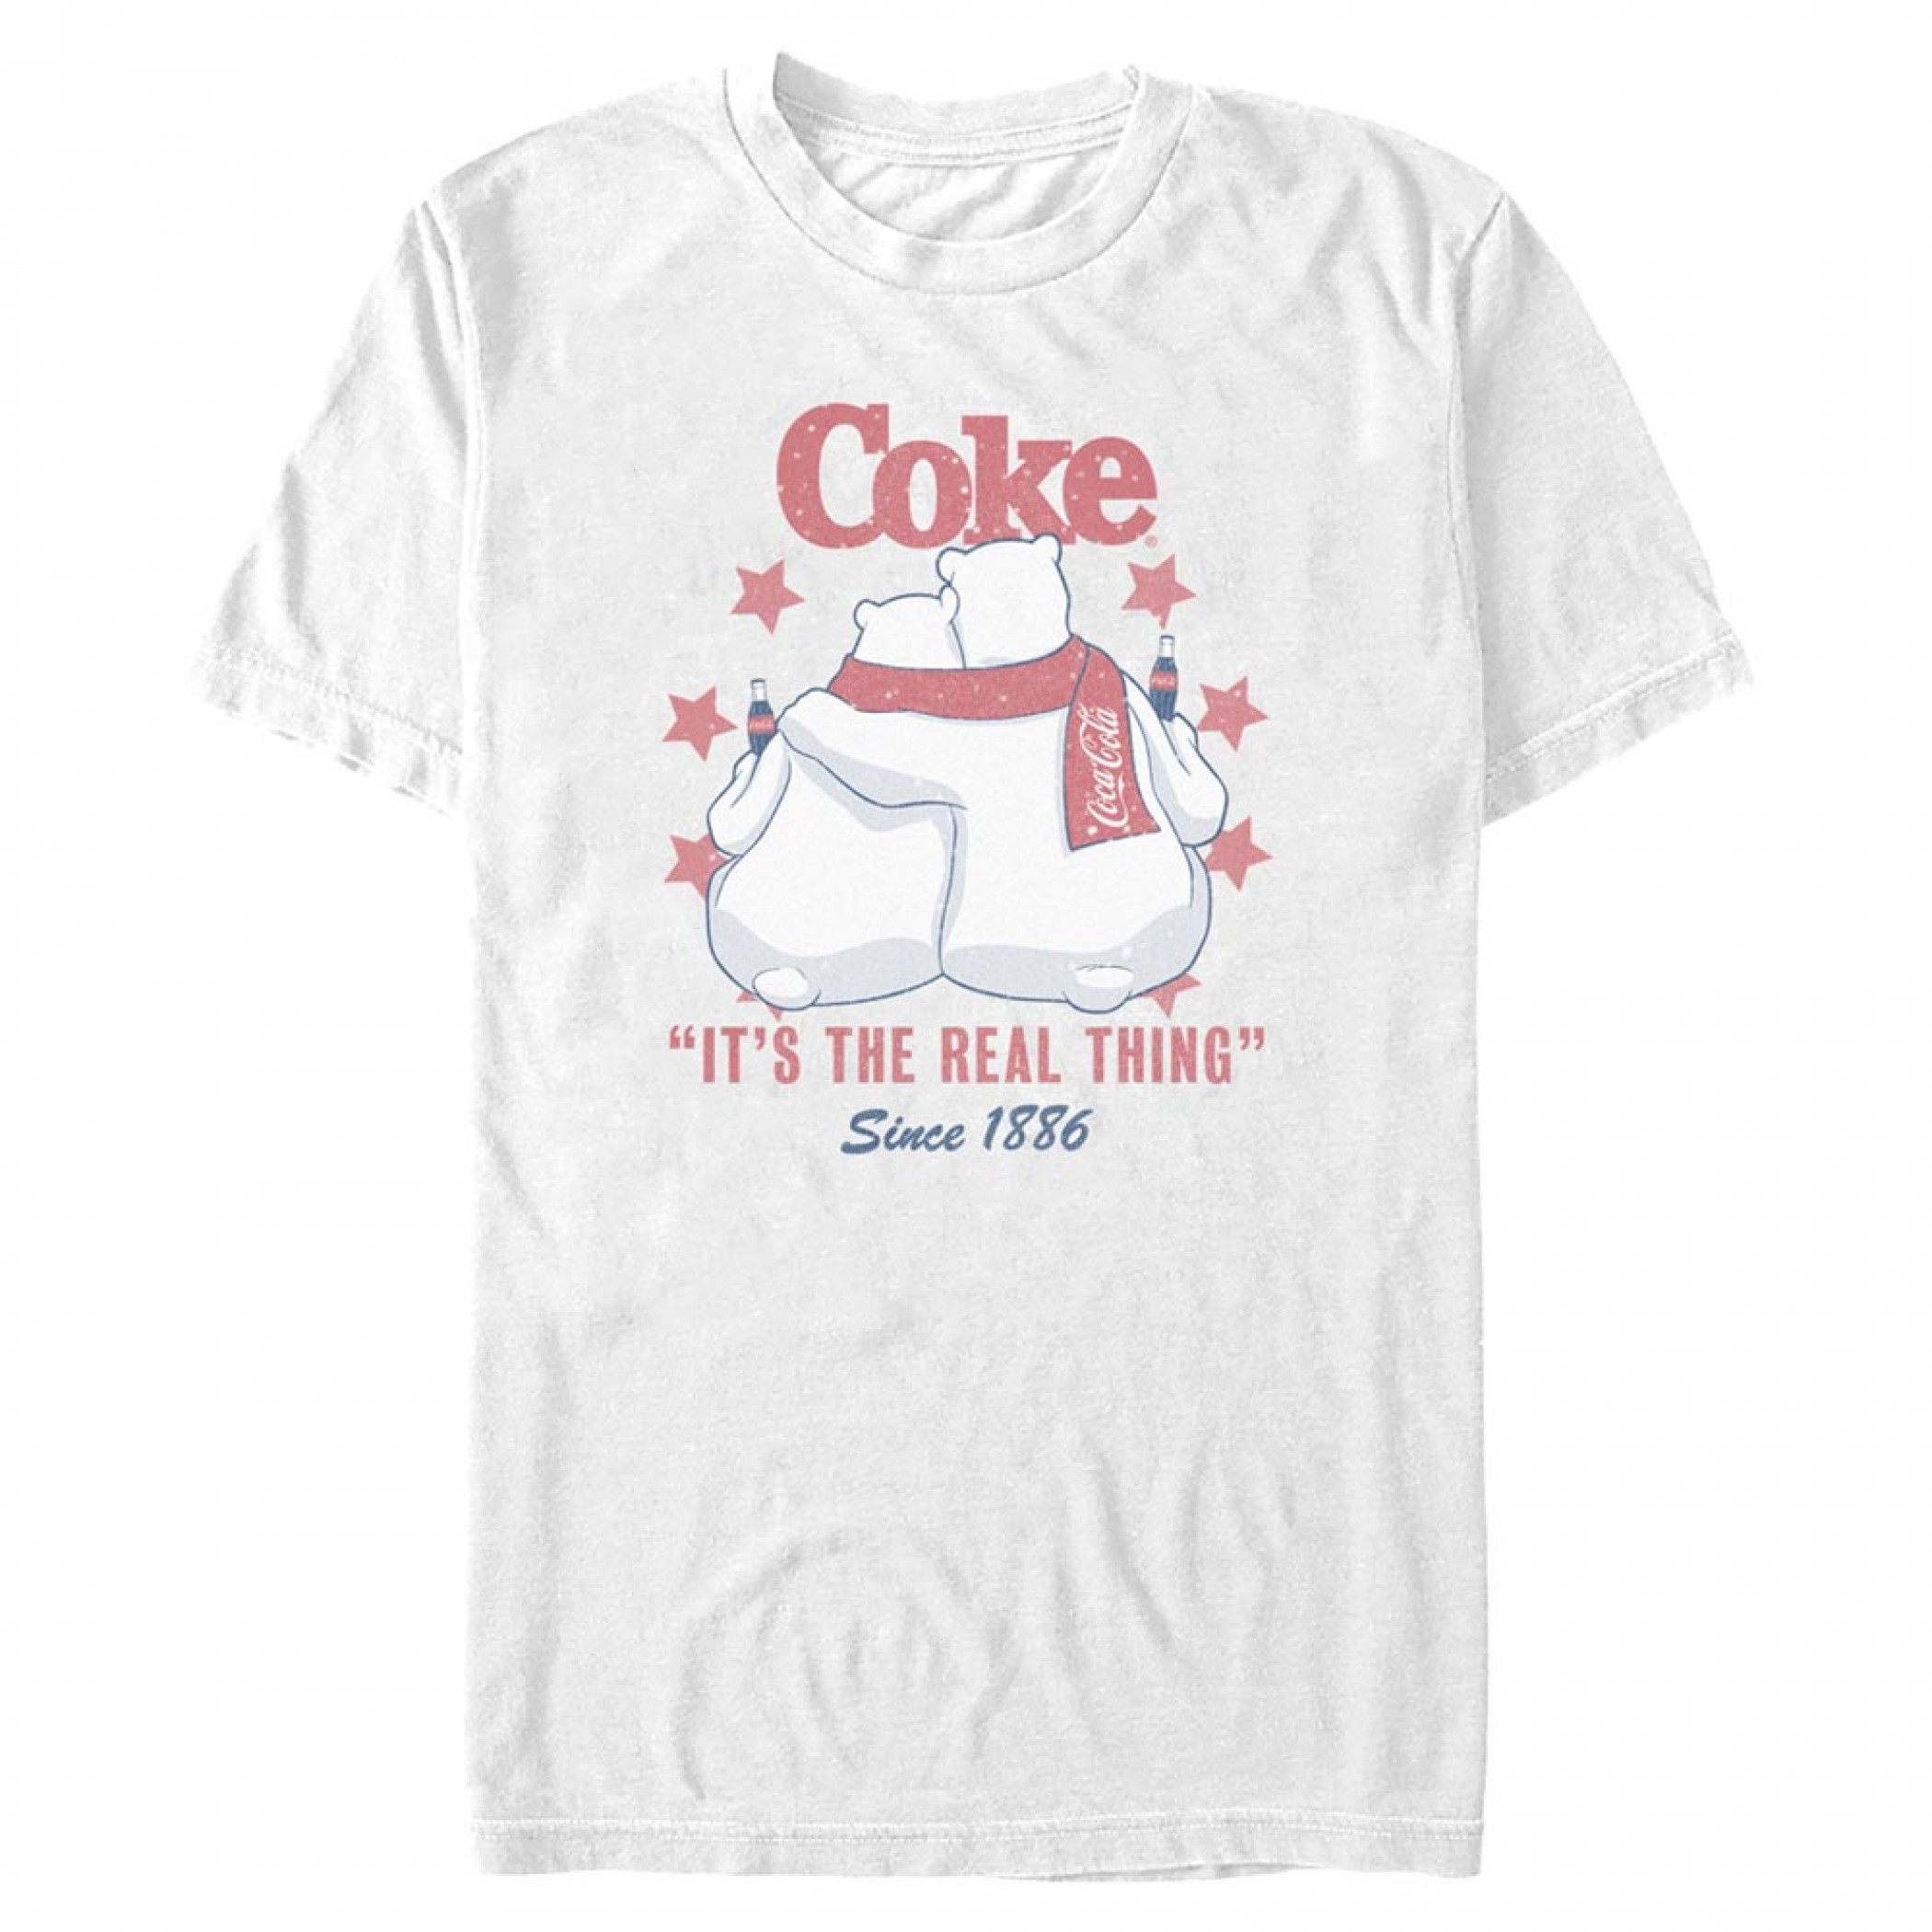 Coca-Cola It's a Cold Day T-Shirt